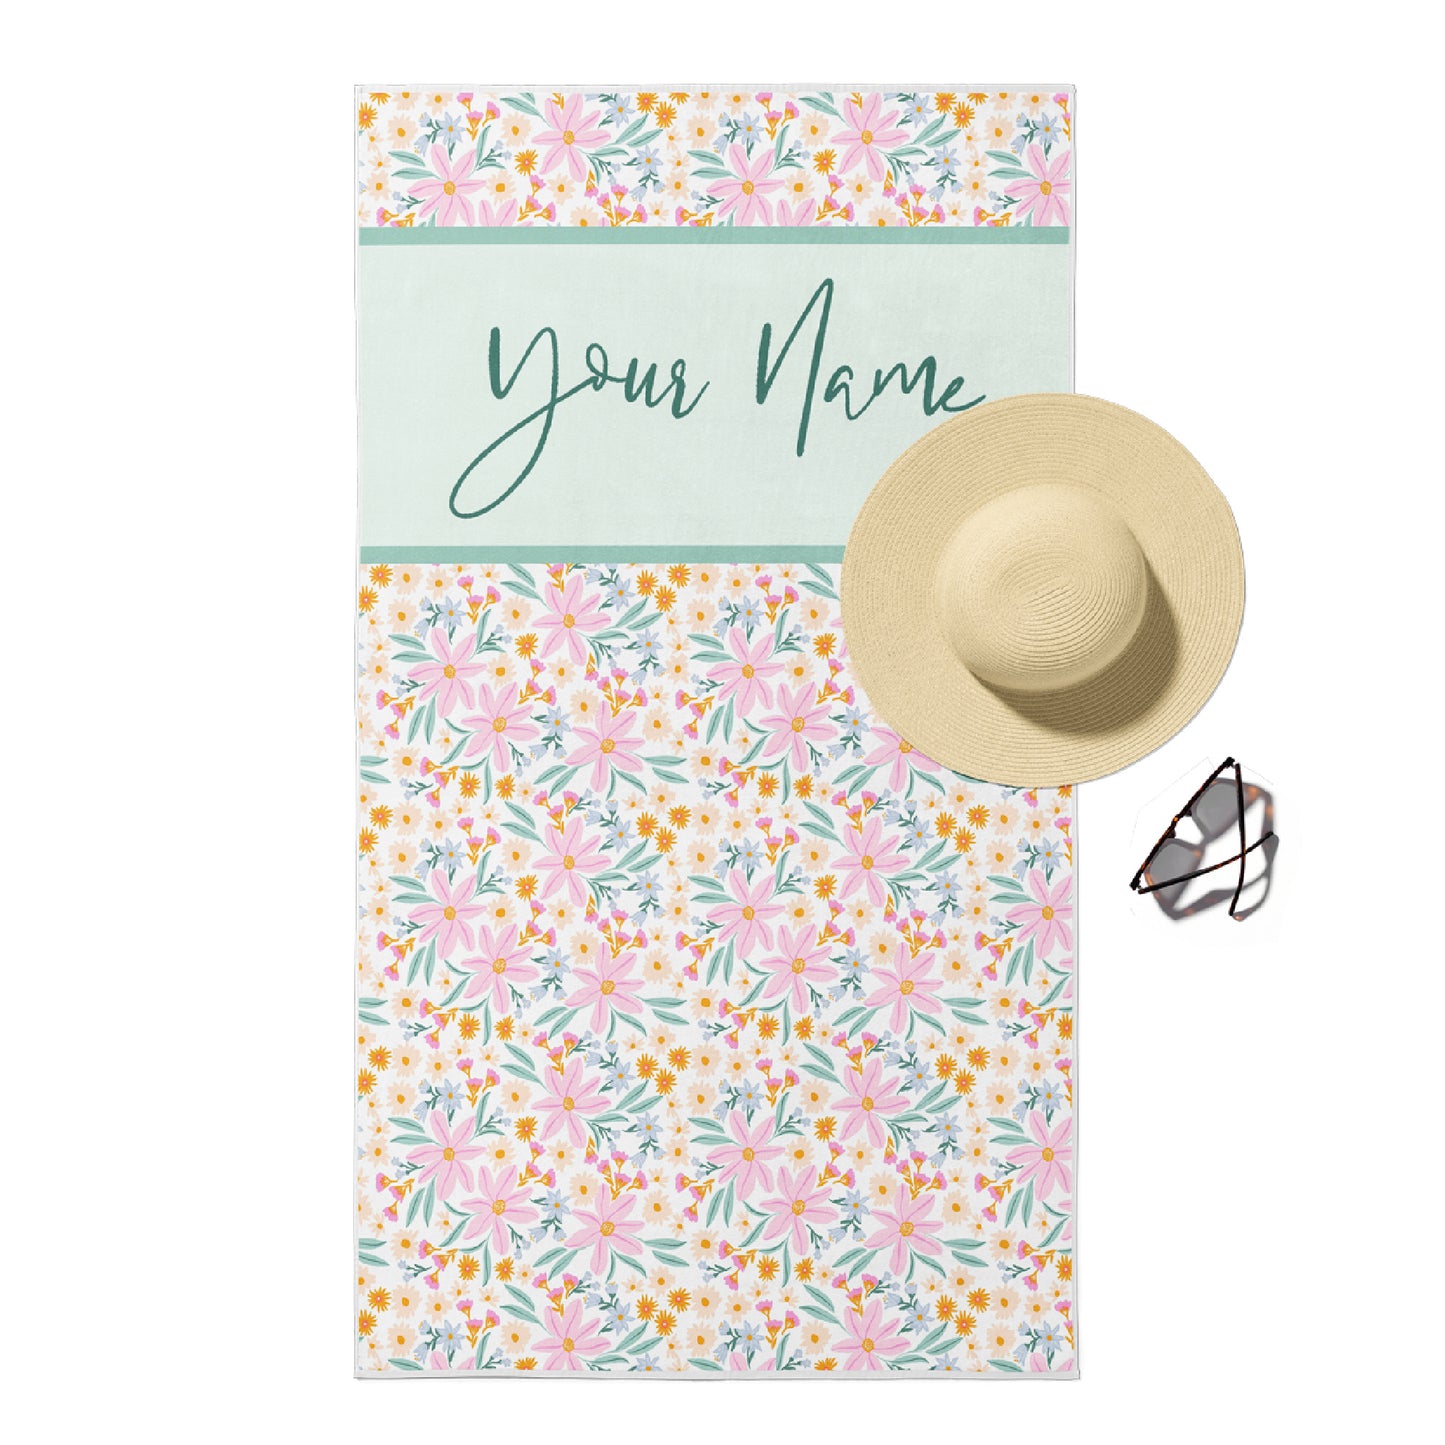 Beach towel in Spring Malibu pastel floral with sage green customizable text.